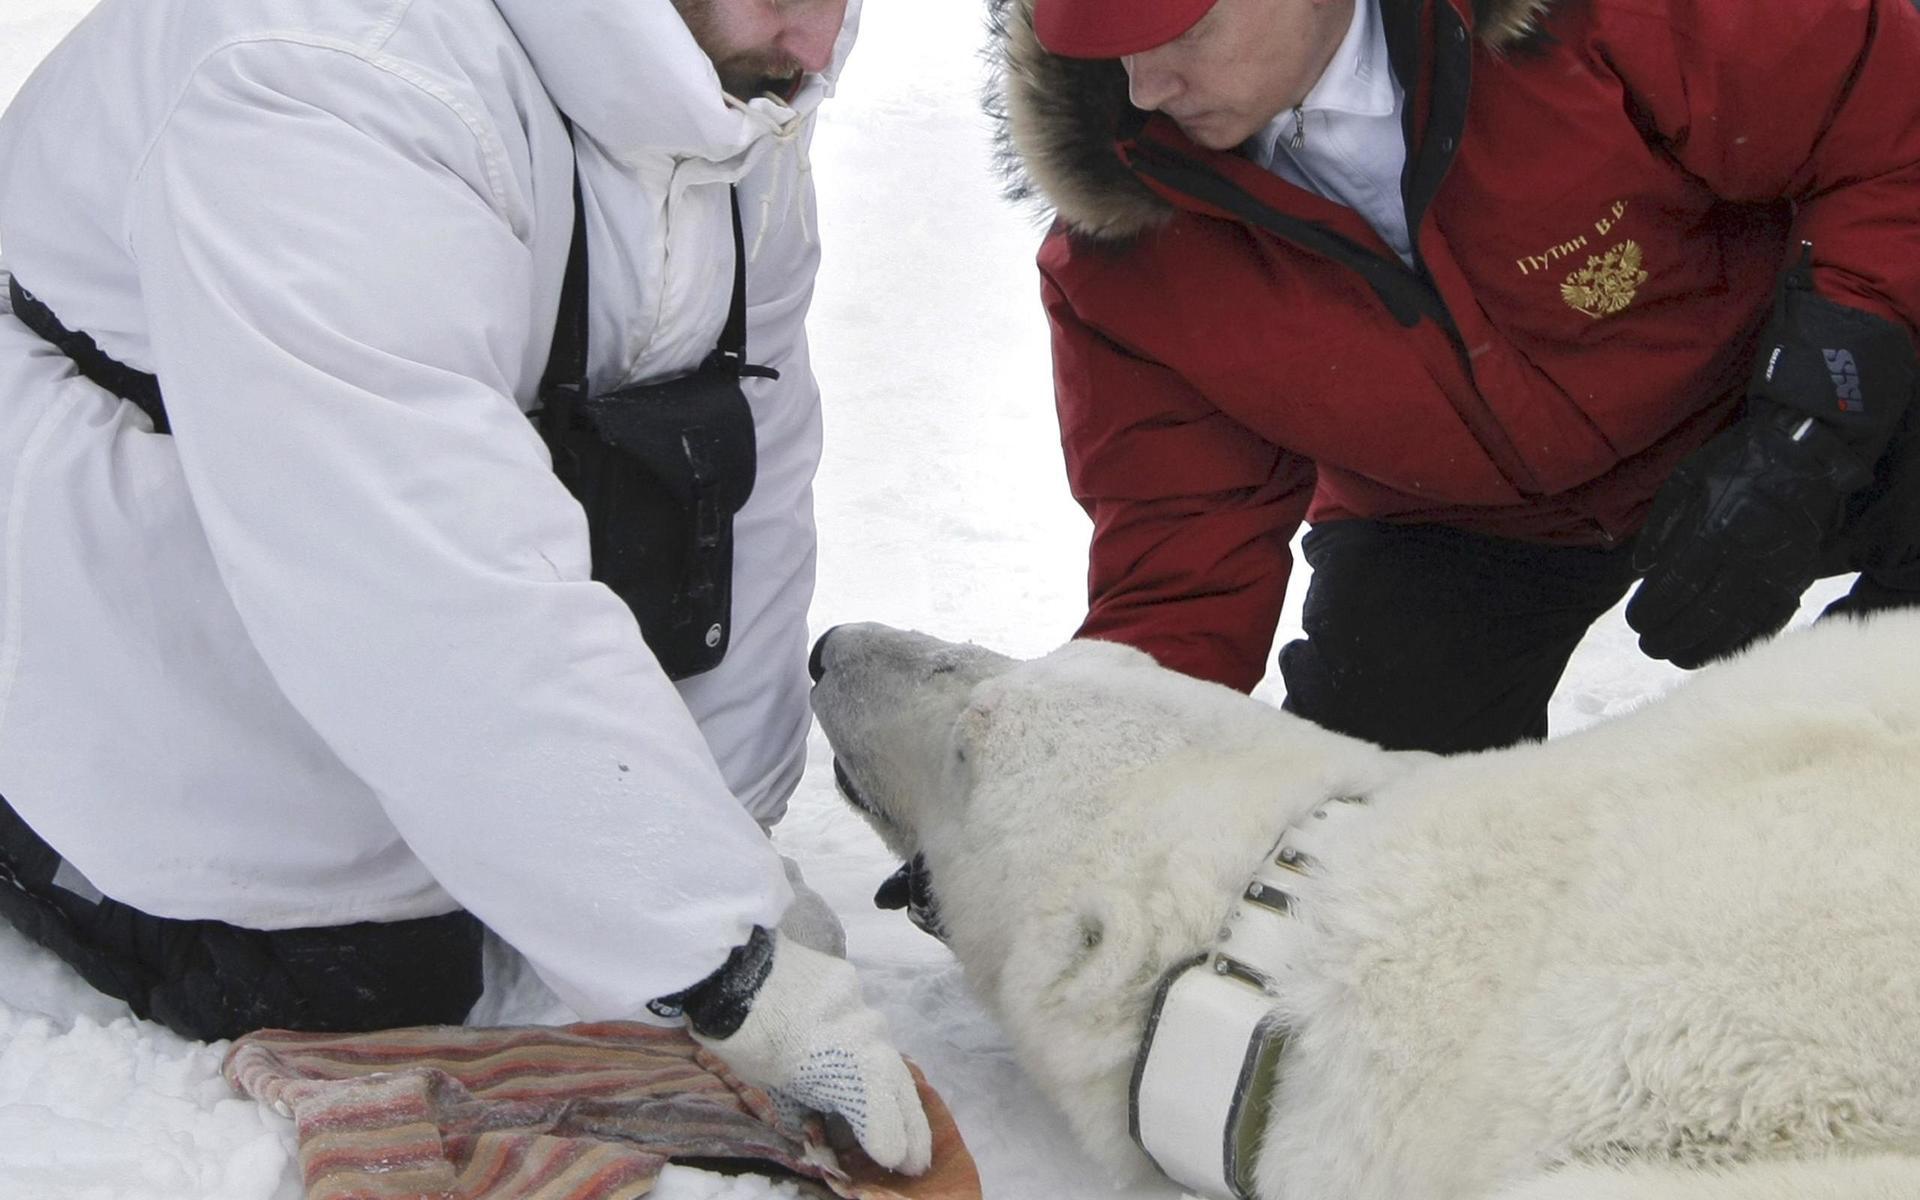 Russian Prime Minister Vladimir Putin, right, fixes a radio beacon on a neck of a polar bear, which was anaesthetized, during a visit to a research institute at the Franz Josef Land archipelago in the Arctic Ocean on Thursday, April 29, 2010.(AP Photo/RIA Novosti, pool)